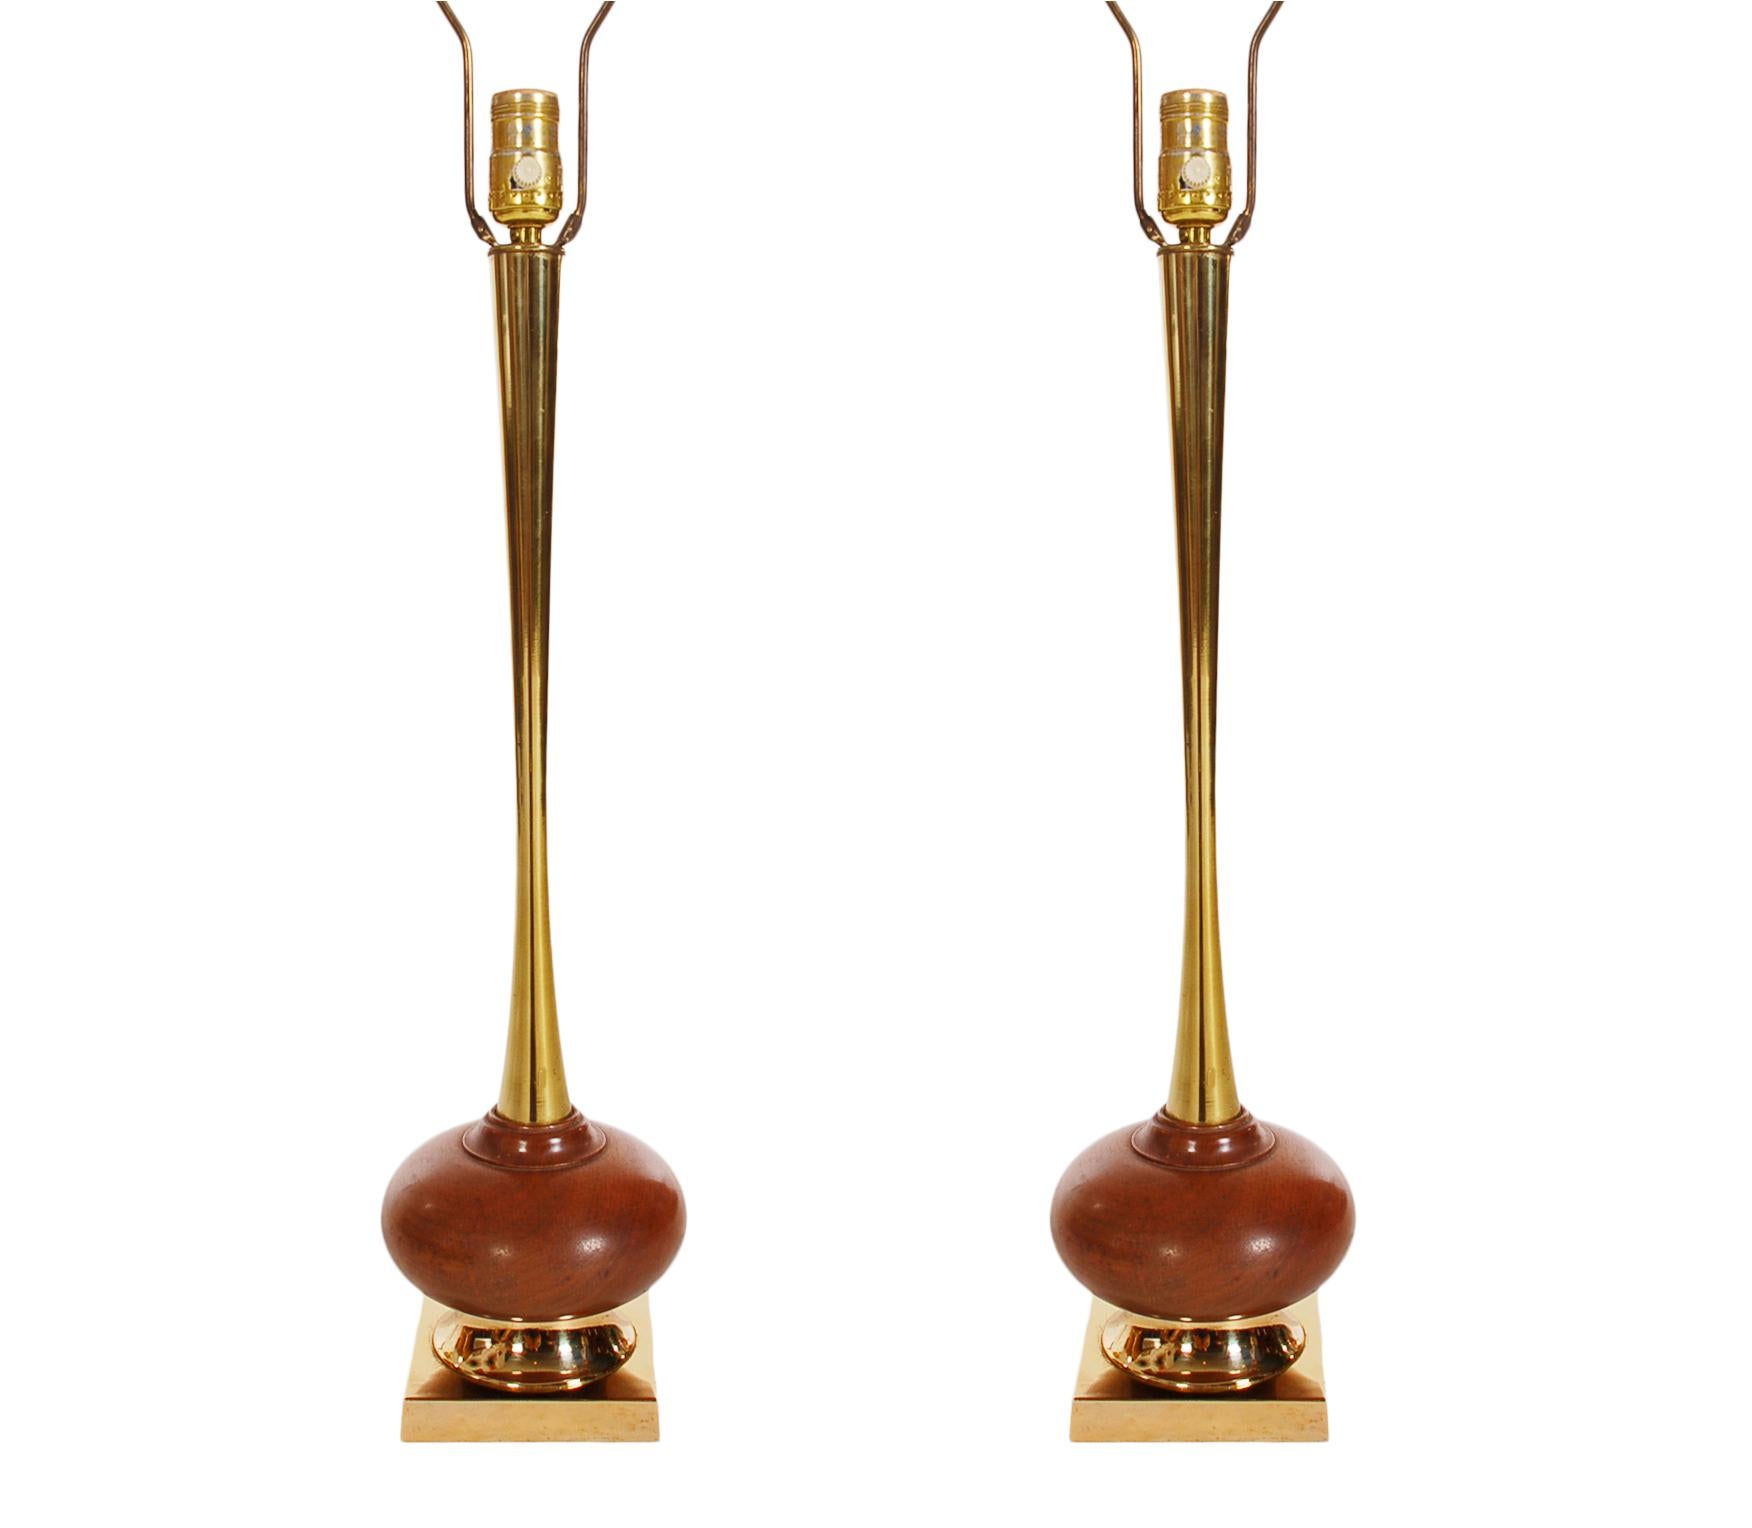 Matching Pair of Mid-Century Modern Tall Walnut and Brass Table Lamps 1